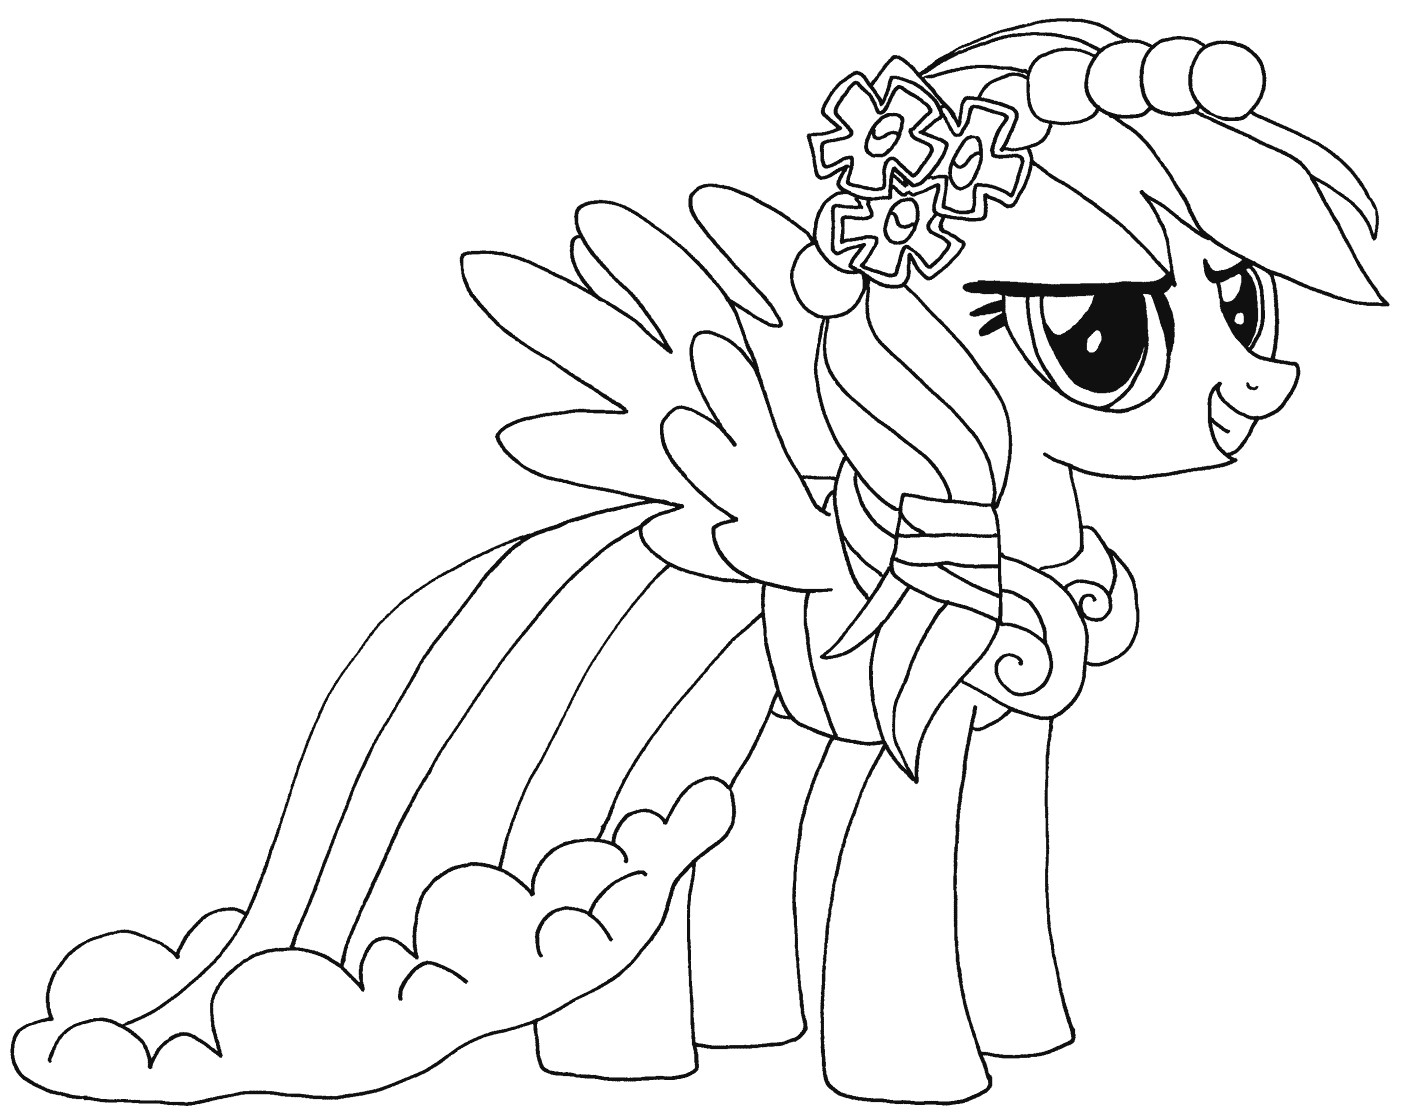 Coloring Sheets For Girls 8 10
 Rainbow Dash coloring pages to and print for free